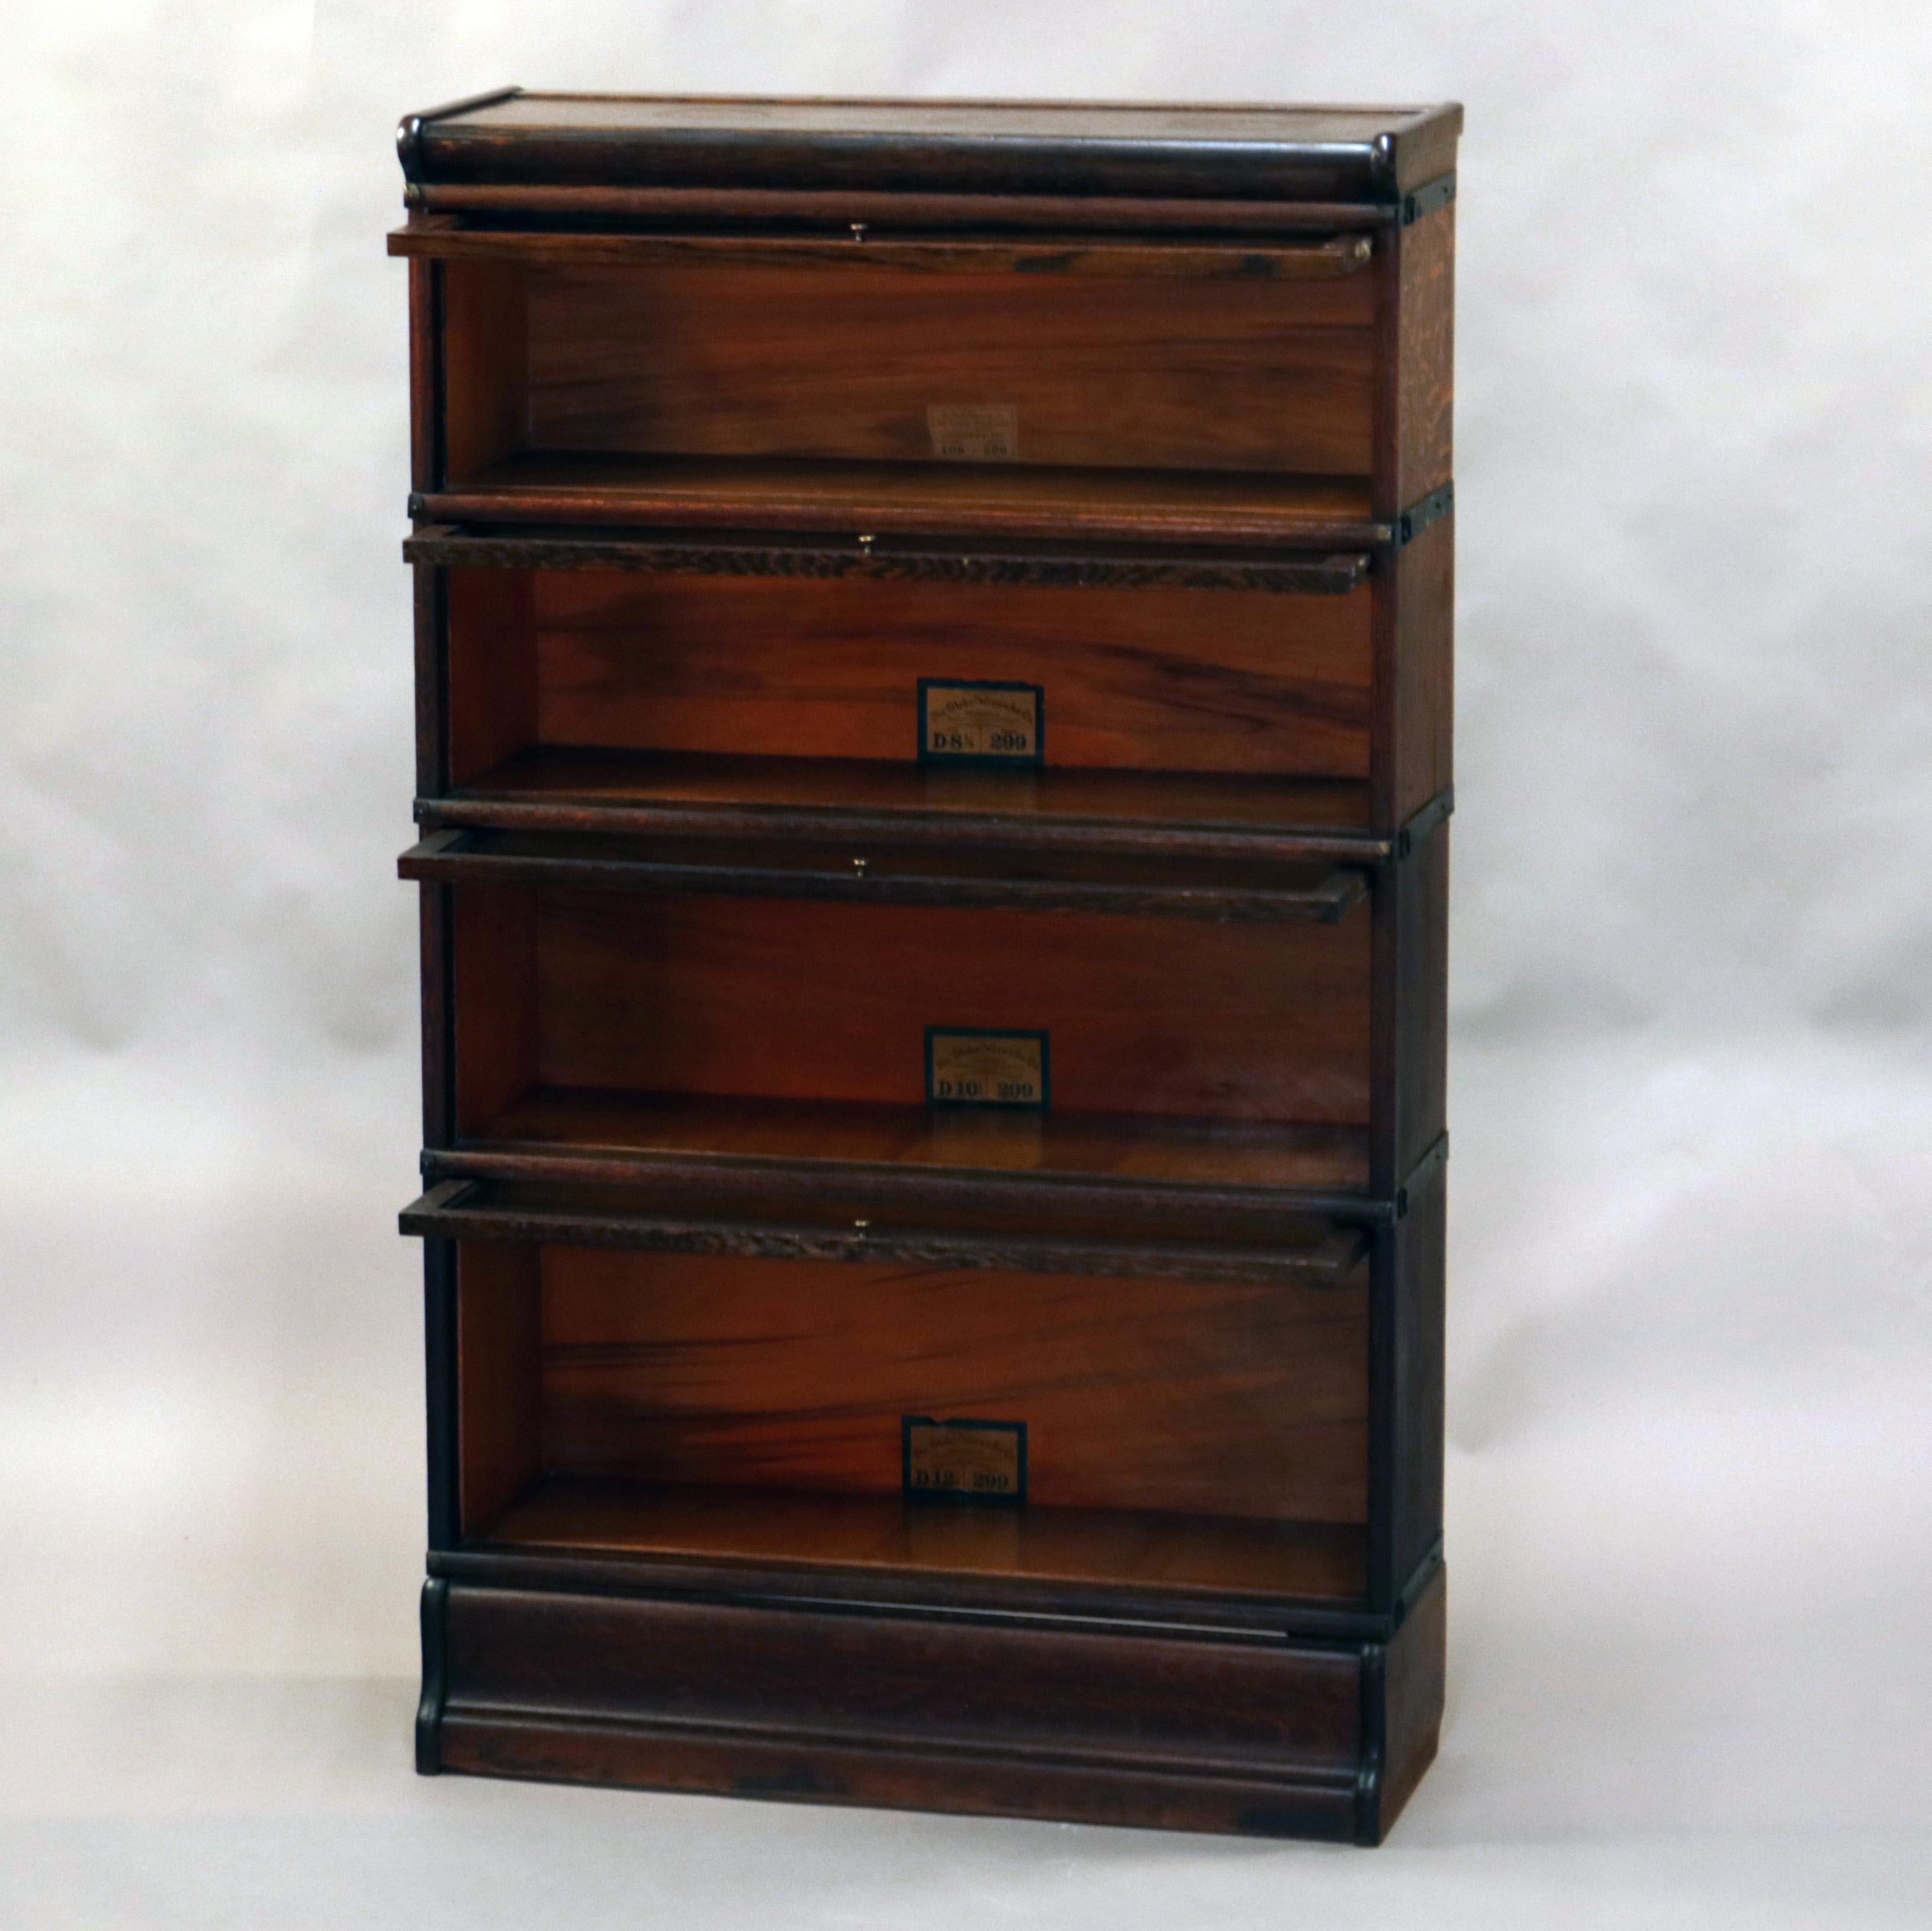 Arts and Crafts Arts & Crafts Mission Oak Barrister Bookcase by Globe-Wernicke, circa 1920